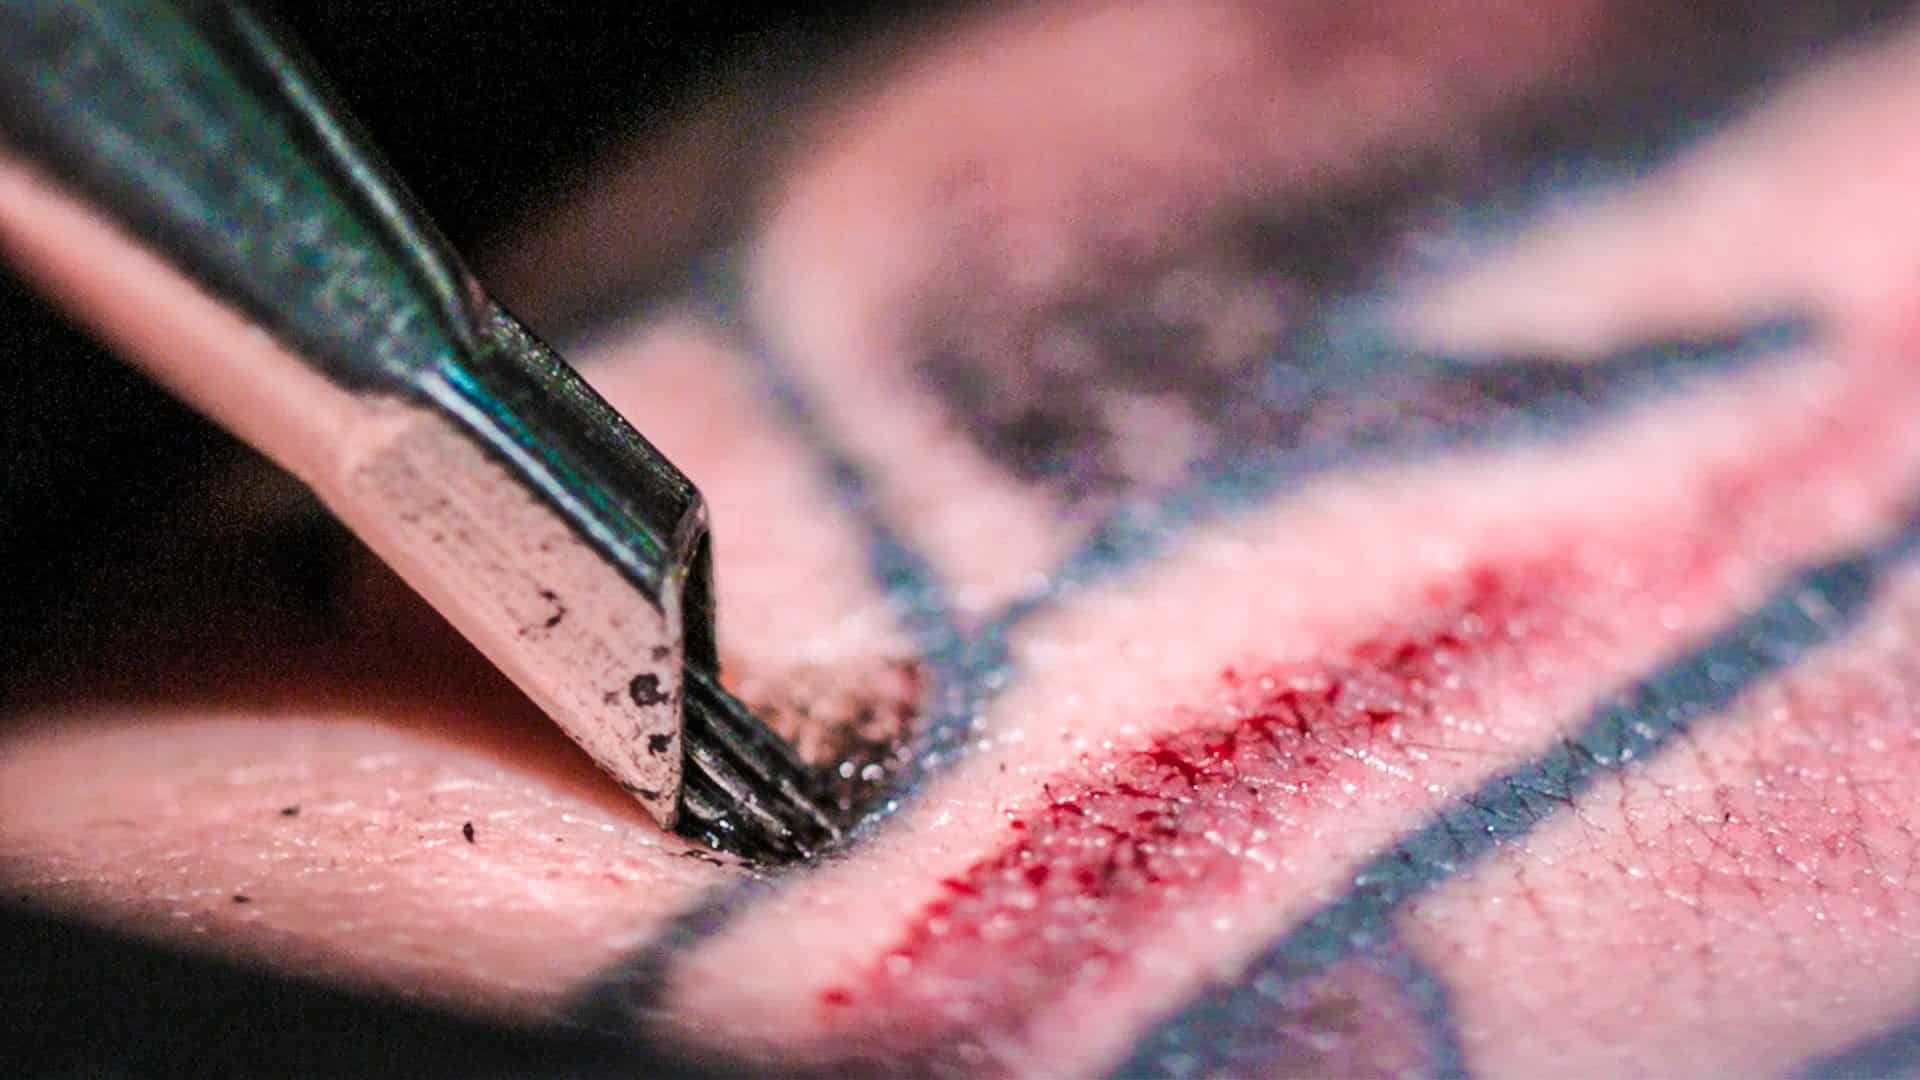 Tattooing in slow motion